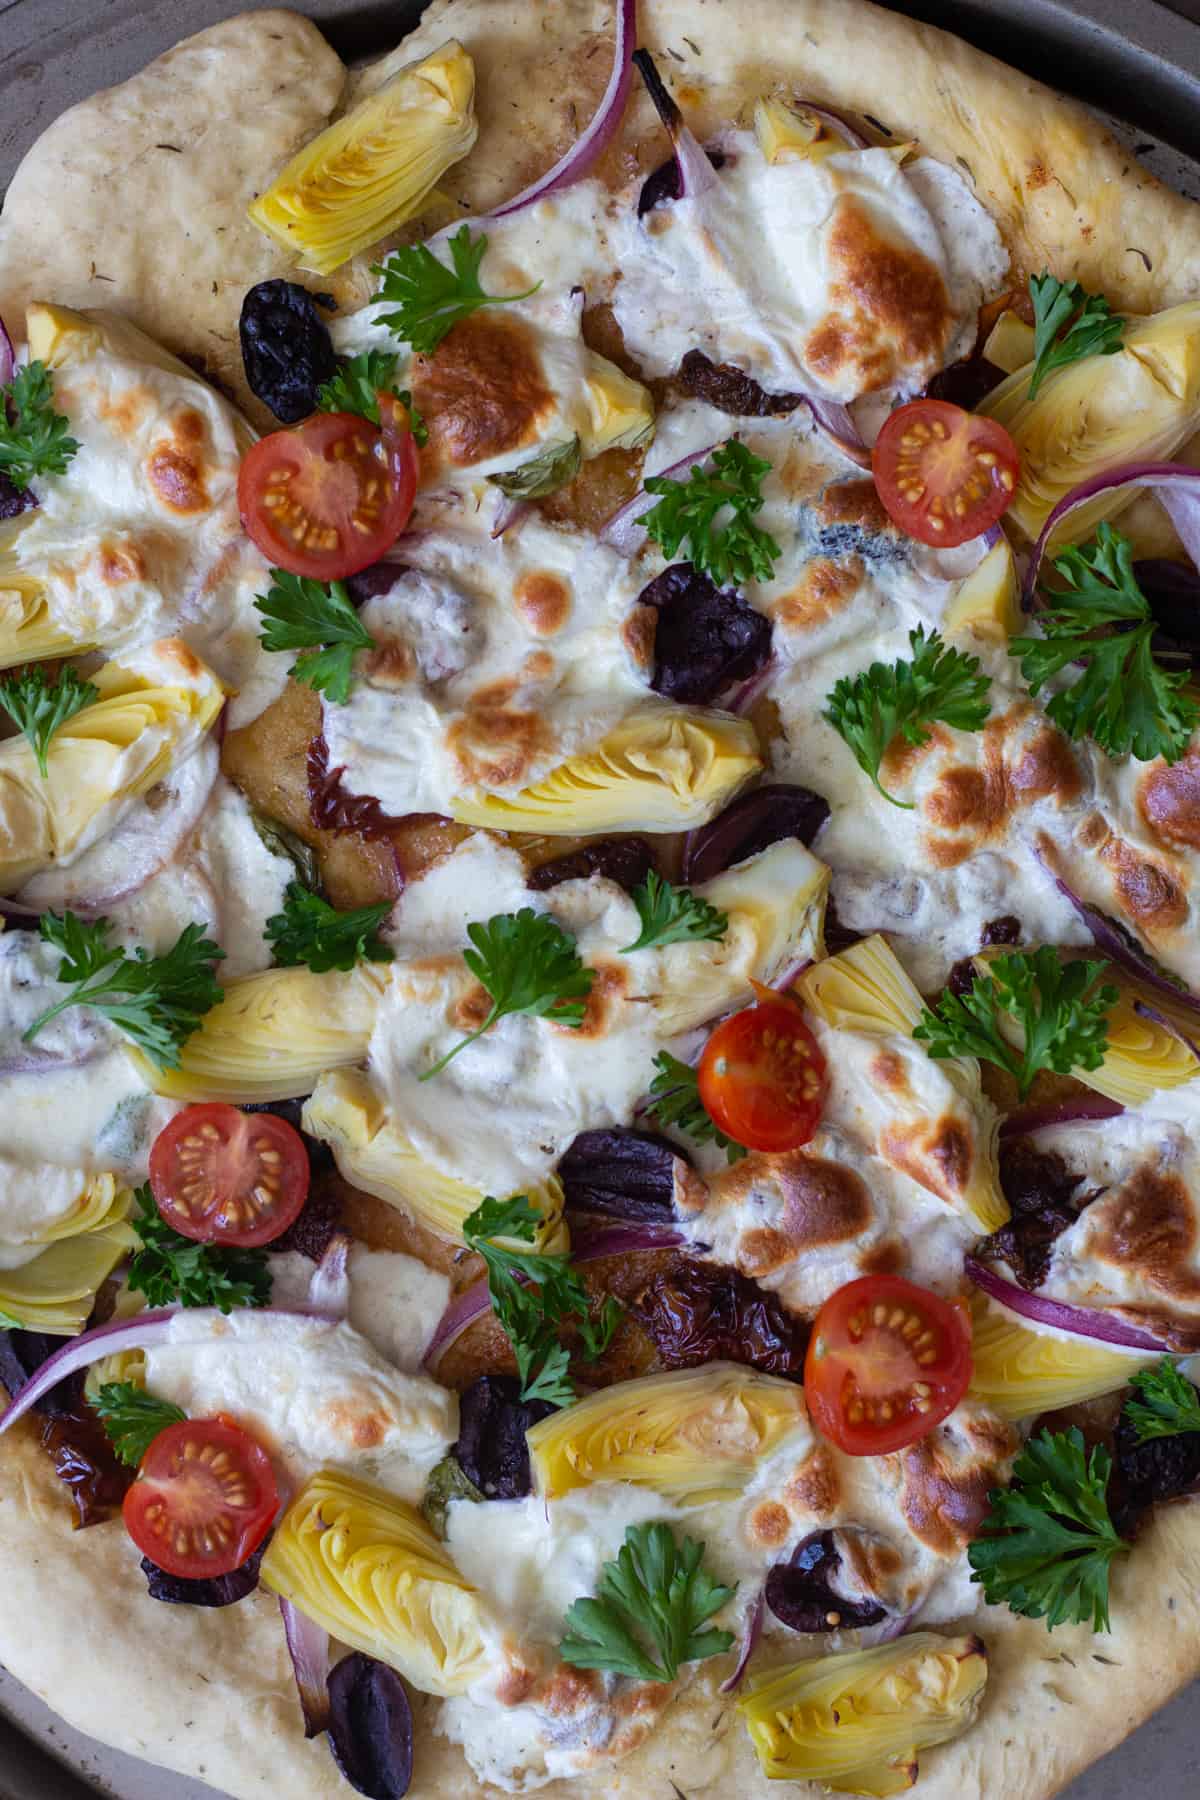 Mediterranean flat bread topped with artichoke hearts, tomatoes, olives and mozzarella cheese